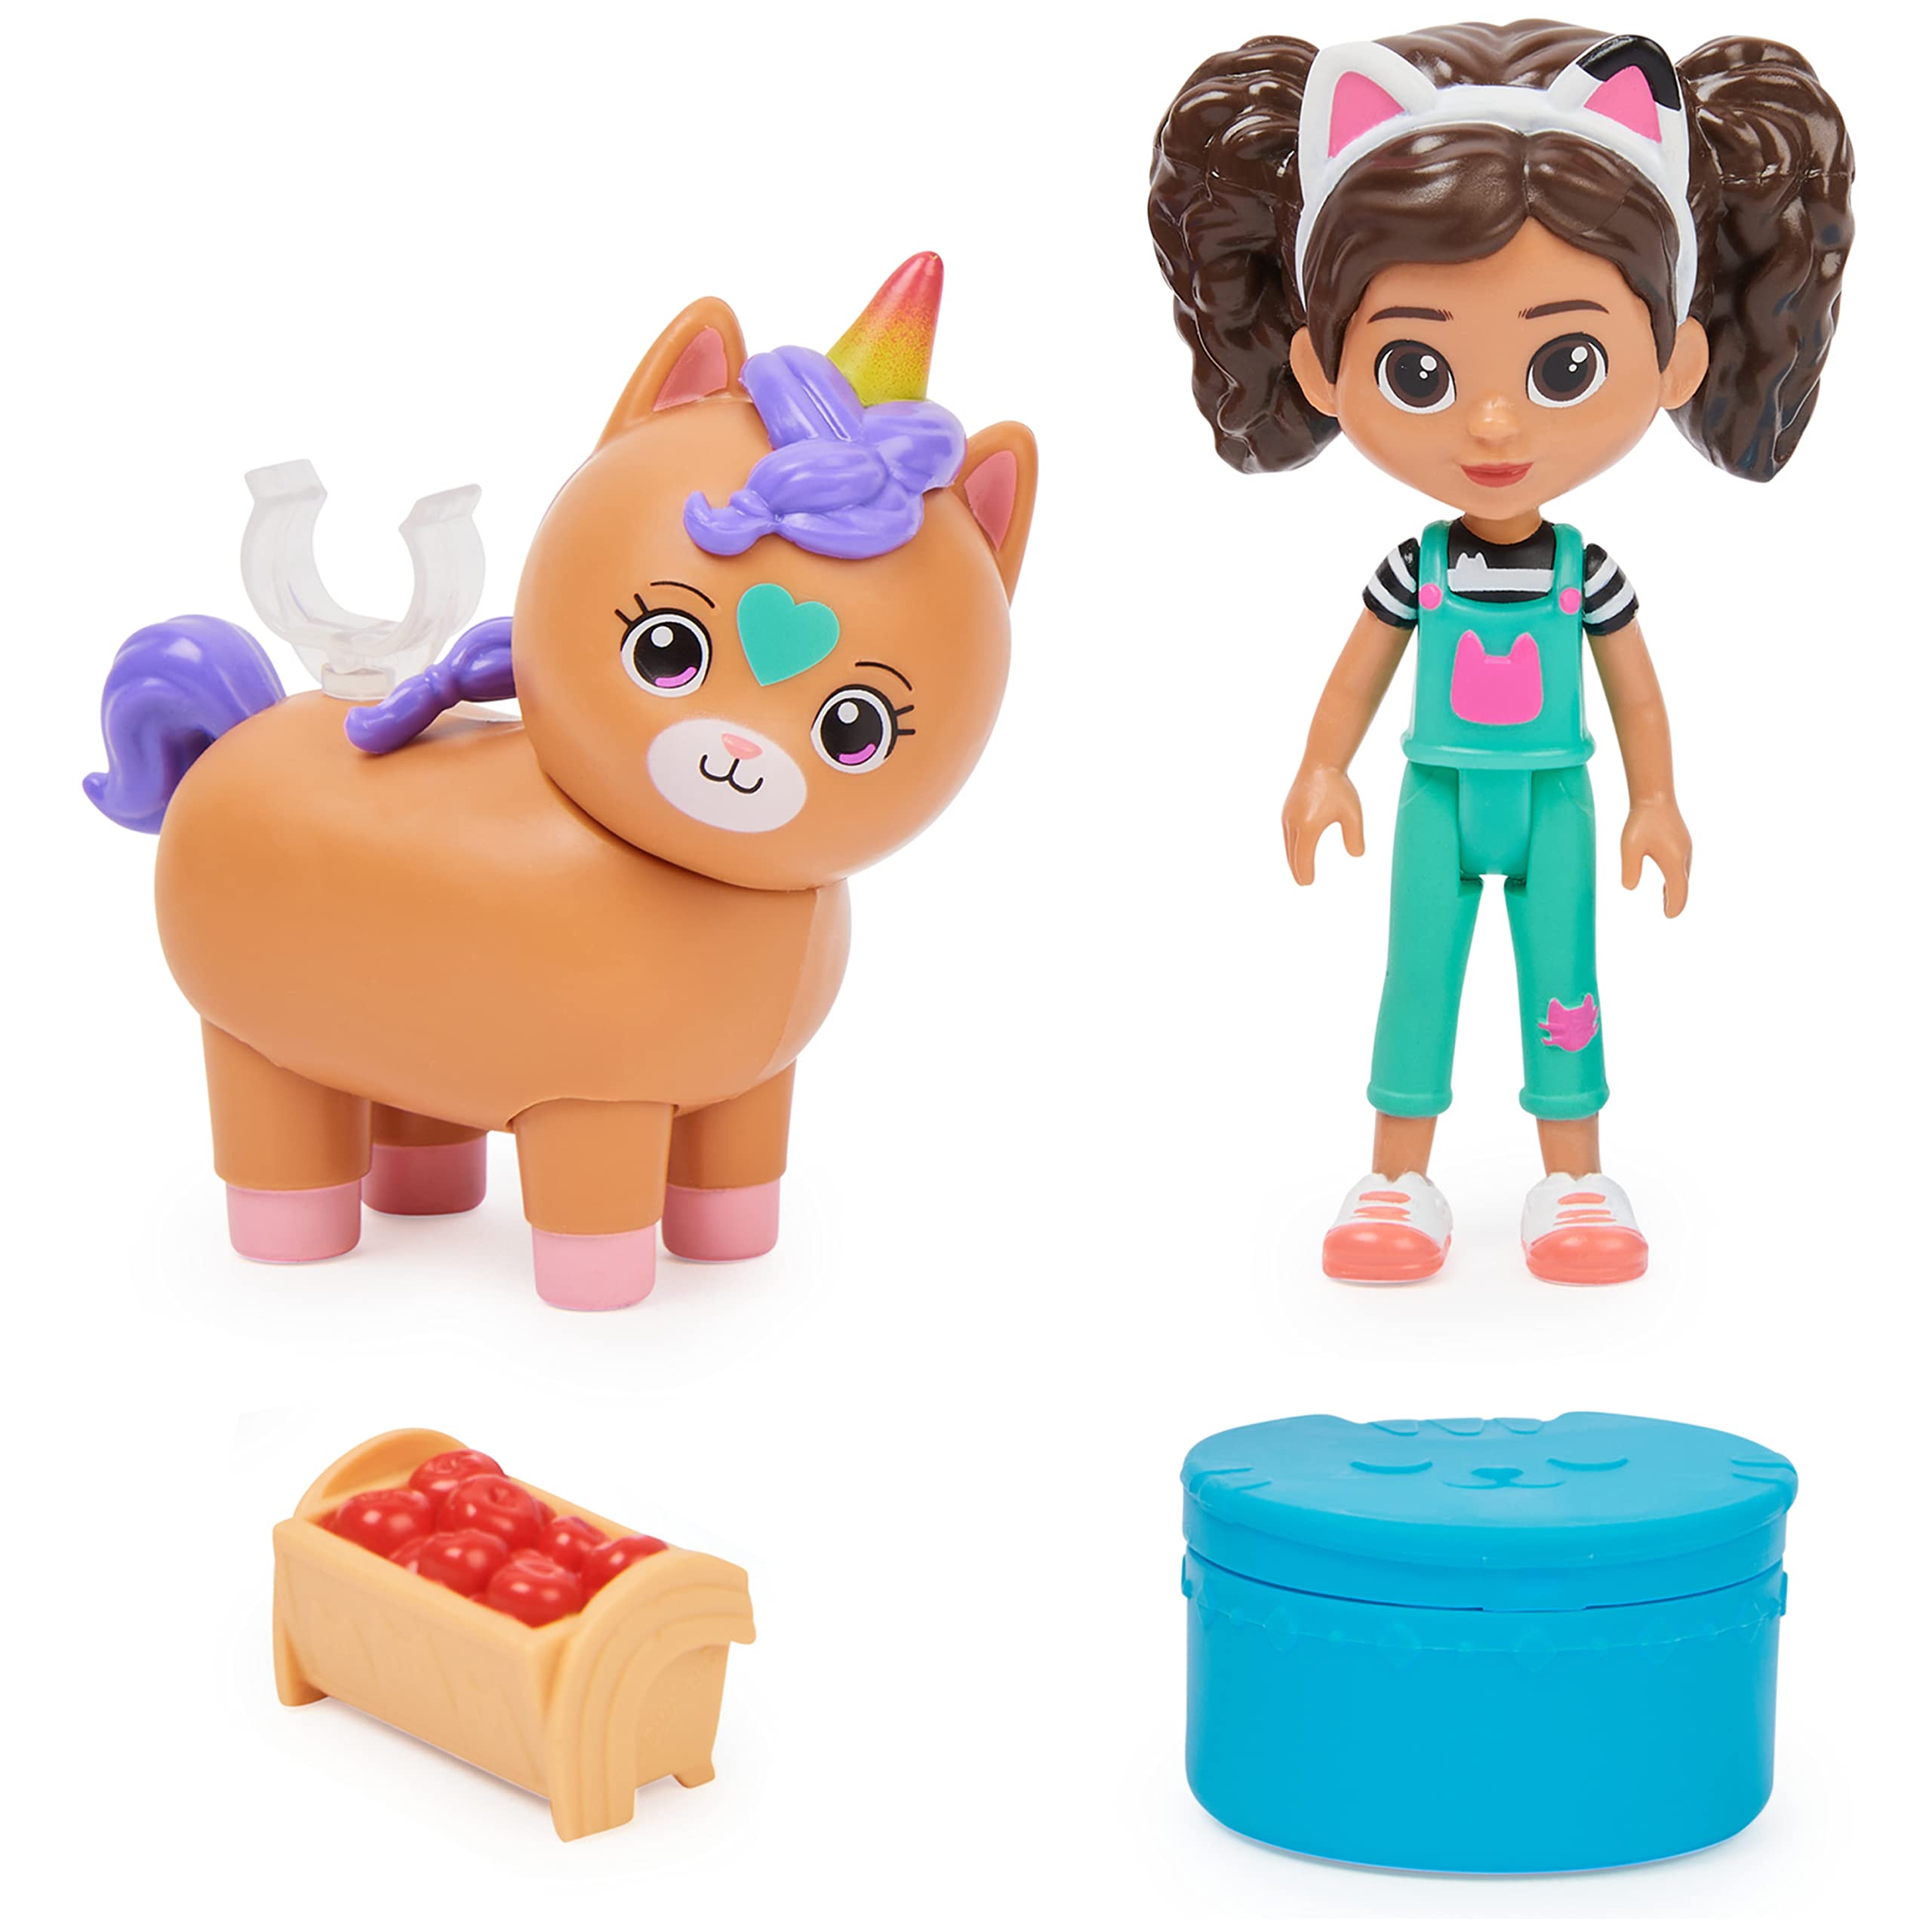 Gabby's Dollhouse, Gabby Girl and Kico the Kittycorn Toy Figures Pack, with Accessories and Surprise Kids Toys for Ages 3 and up